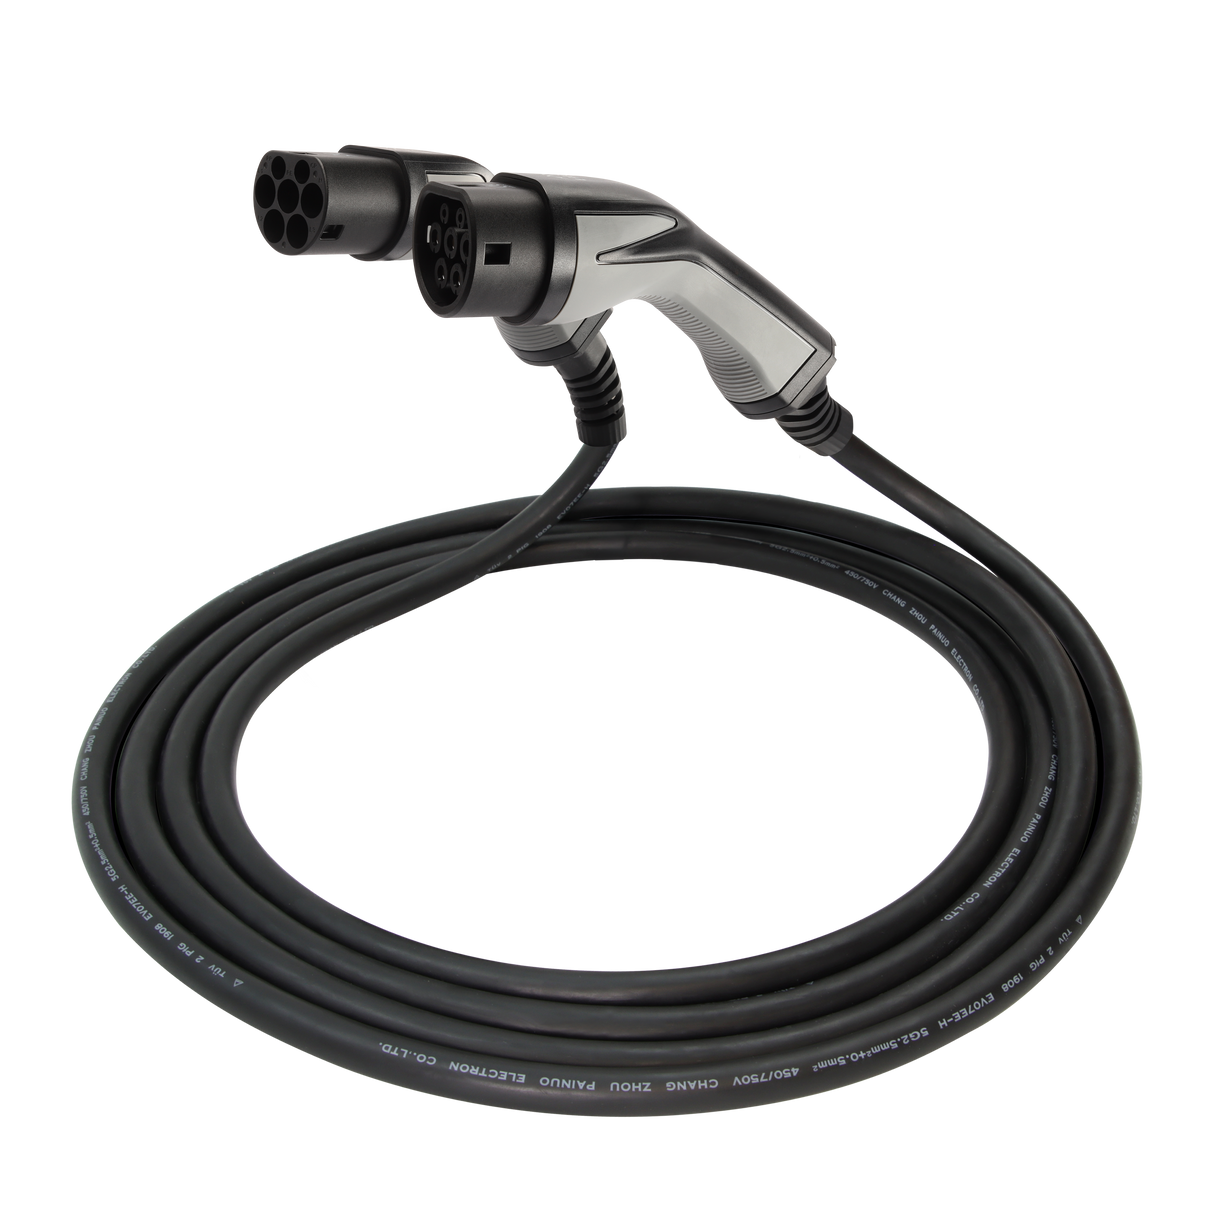 Charging cable Mercedes S -Class - Erock Pro Type 2 - 16A 3 phase (11 kW)